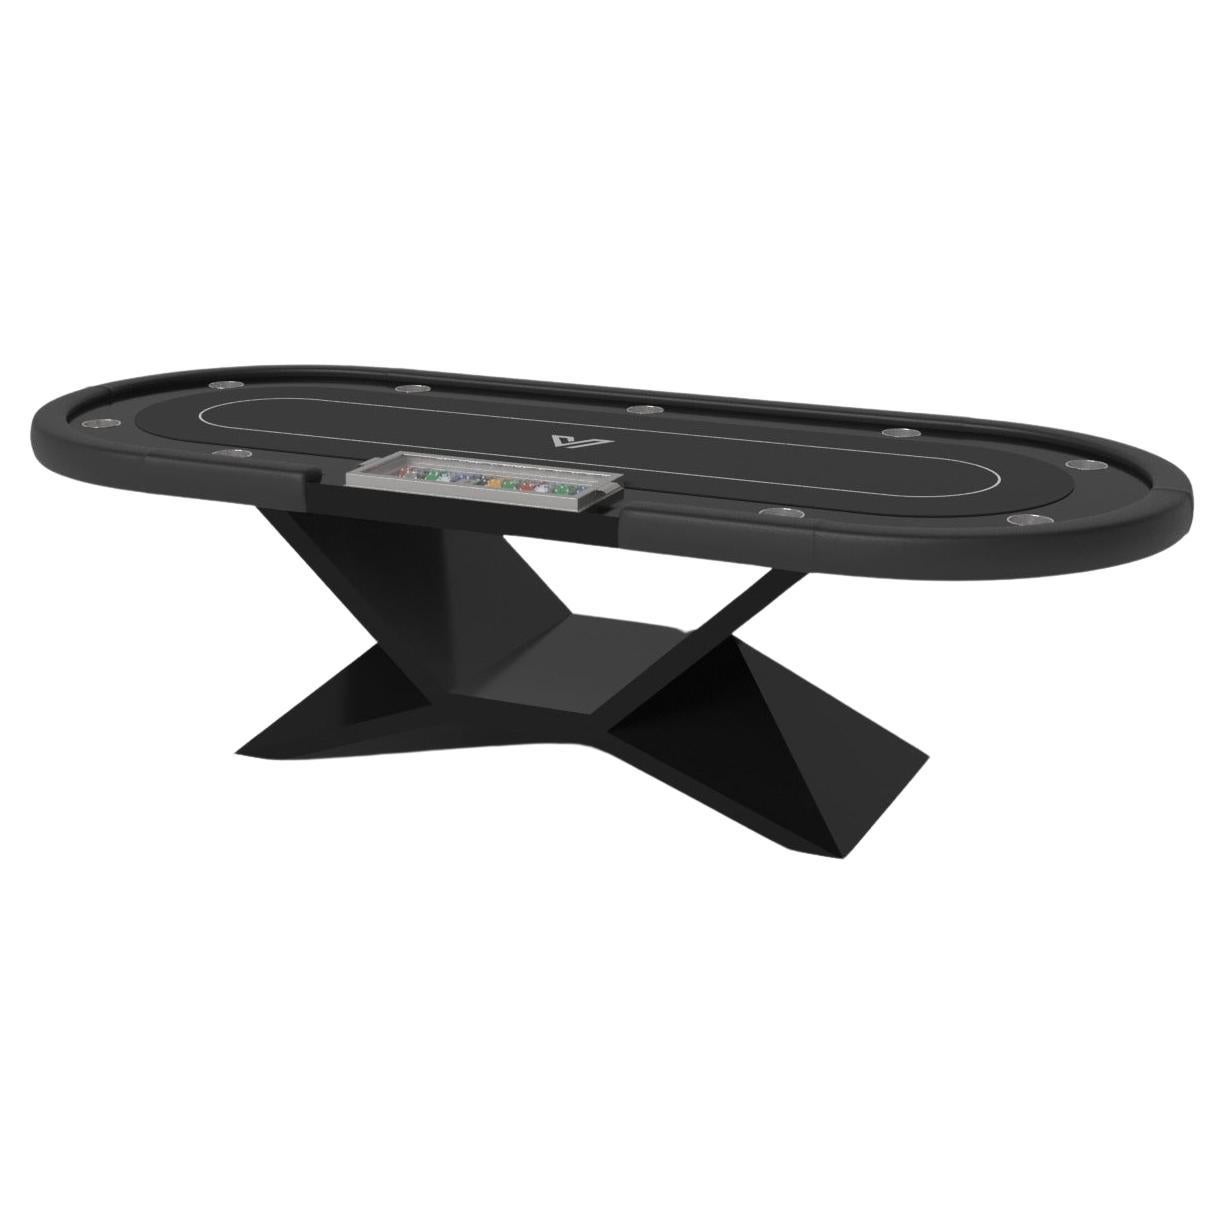 Elevate Customs Kors Poker Tables/Solid Pantone Black Color in 8'8" -Made in USA